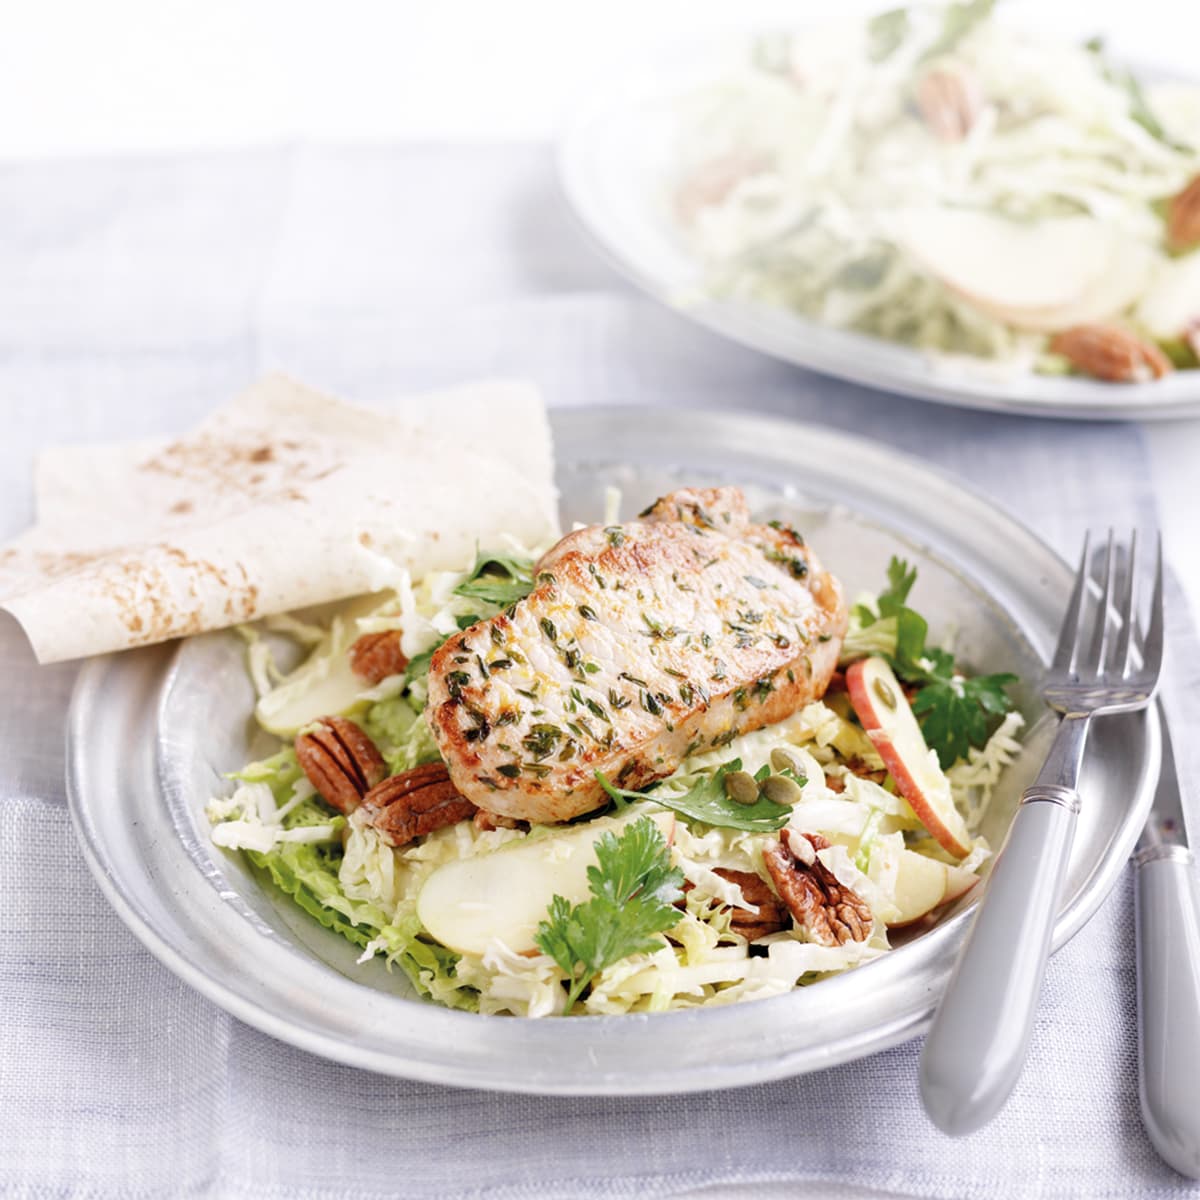 Lemon and thyme pork with cabbage salad - Healthy Food Guide